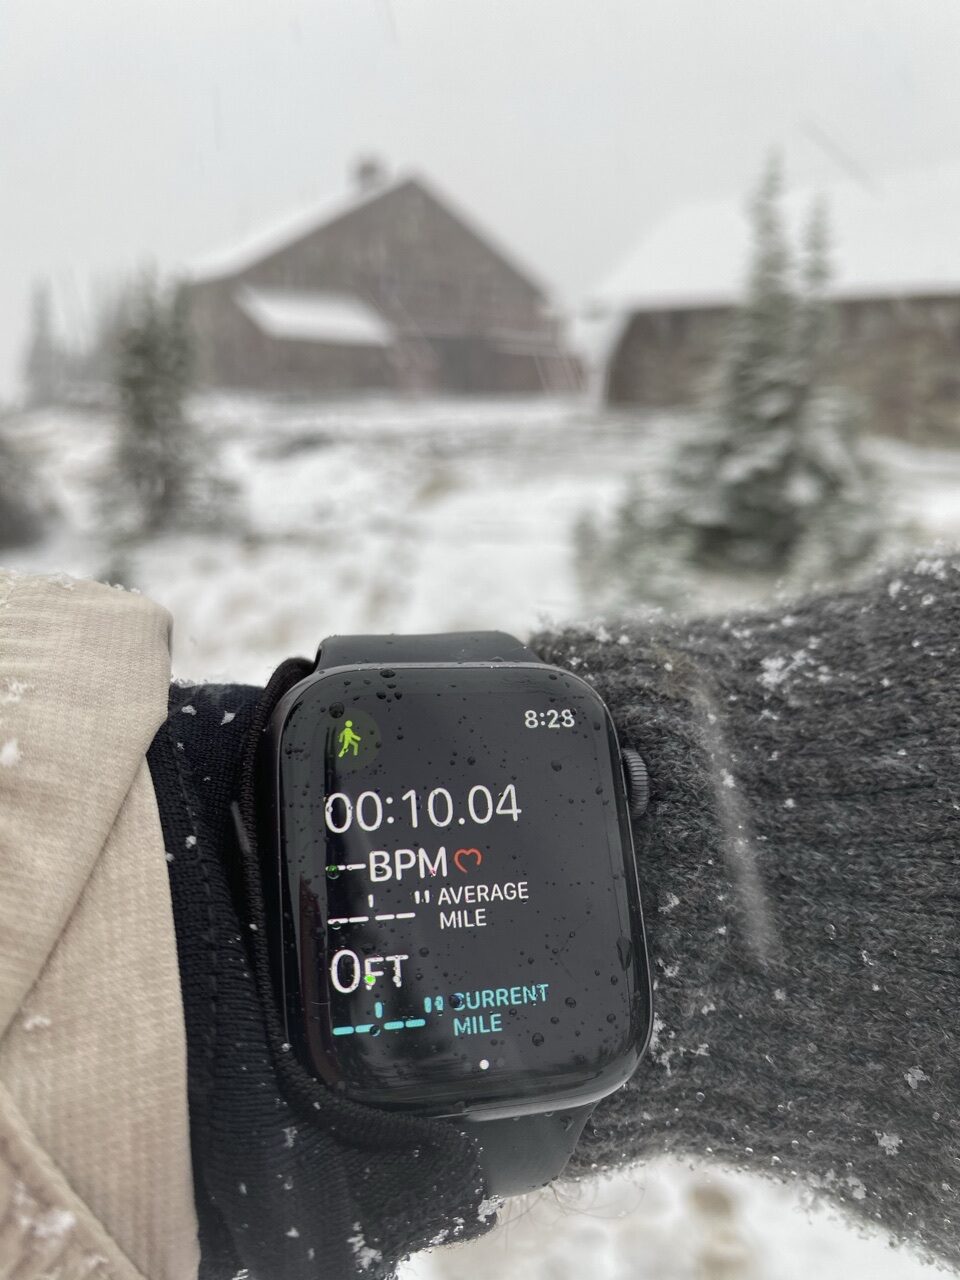 AppleWatch in foreground with mountain chalet in background during snow storm